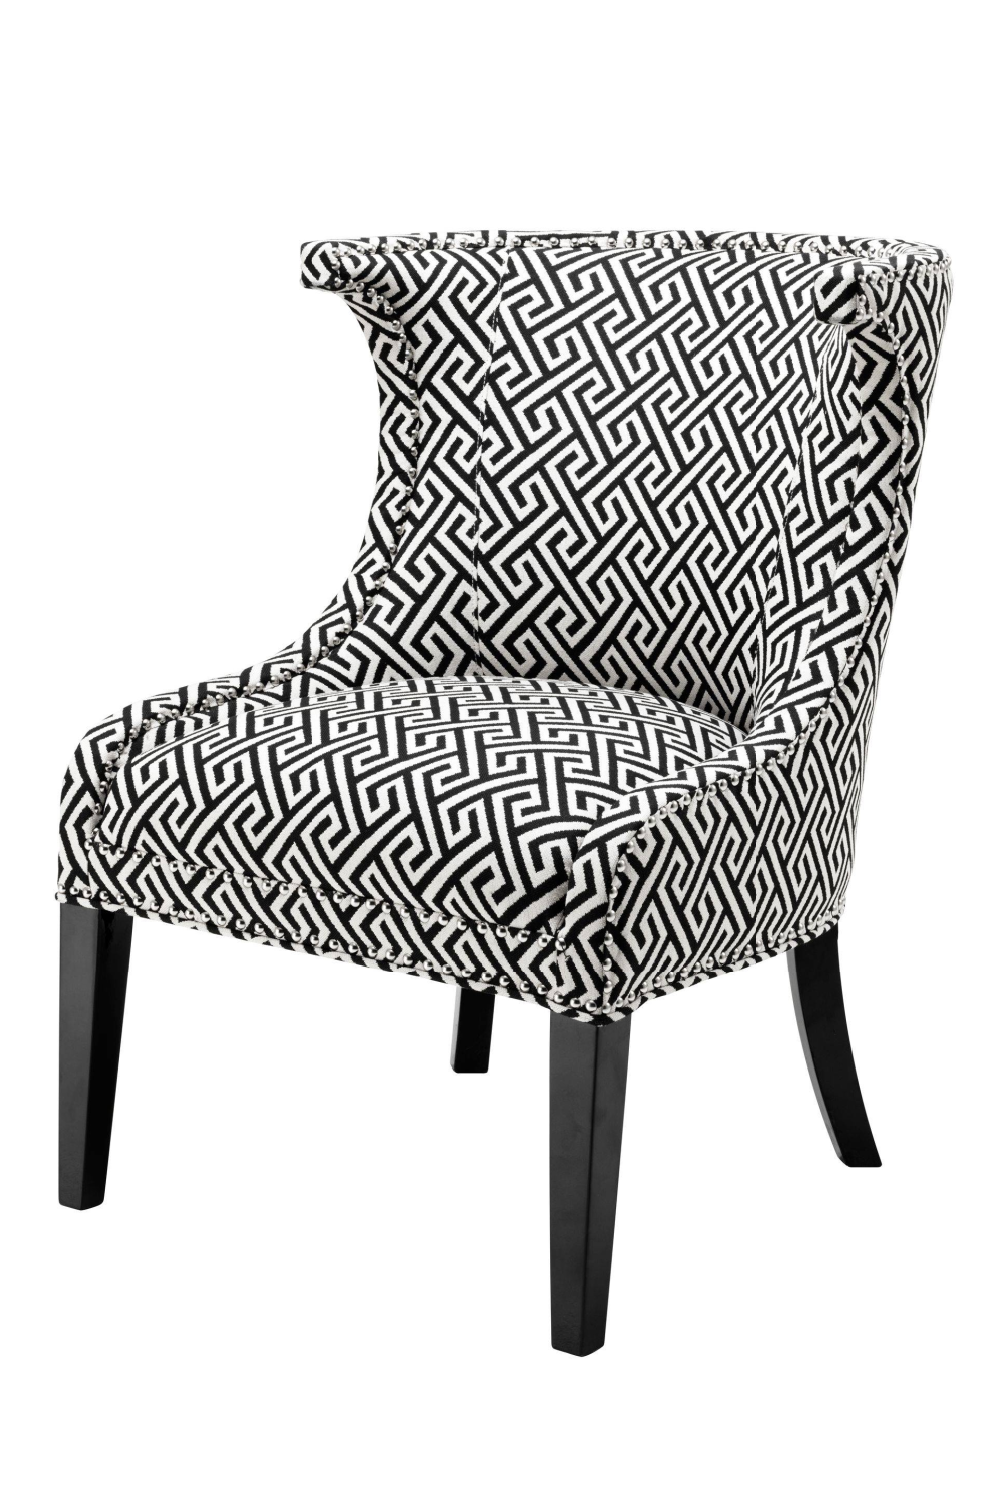 Modern Patterned Dining Chair | Eichholtz Elson | Oroa.com